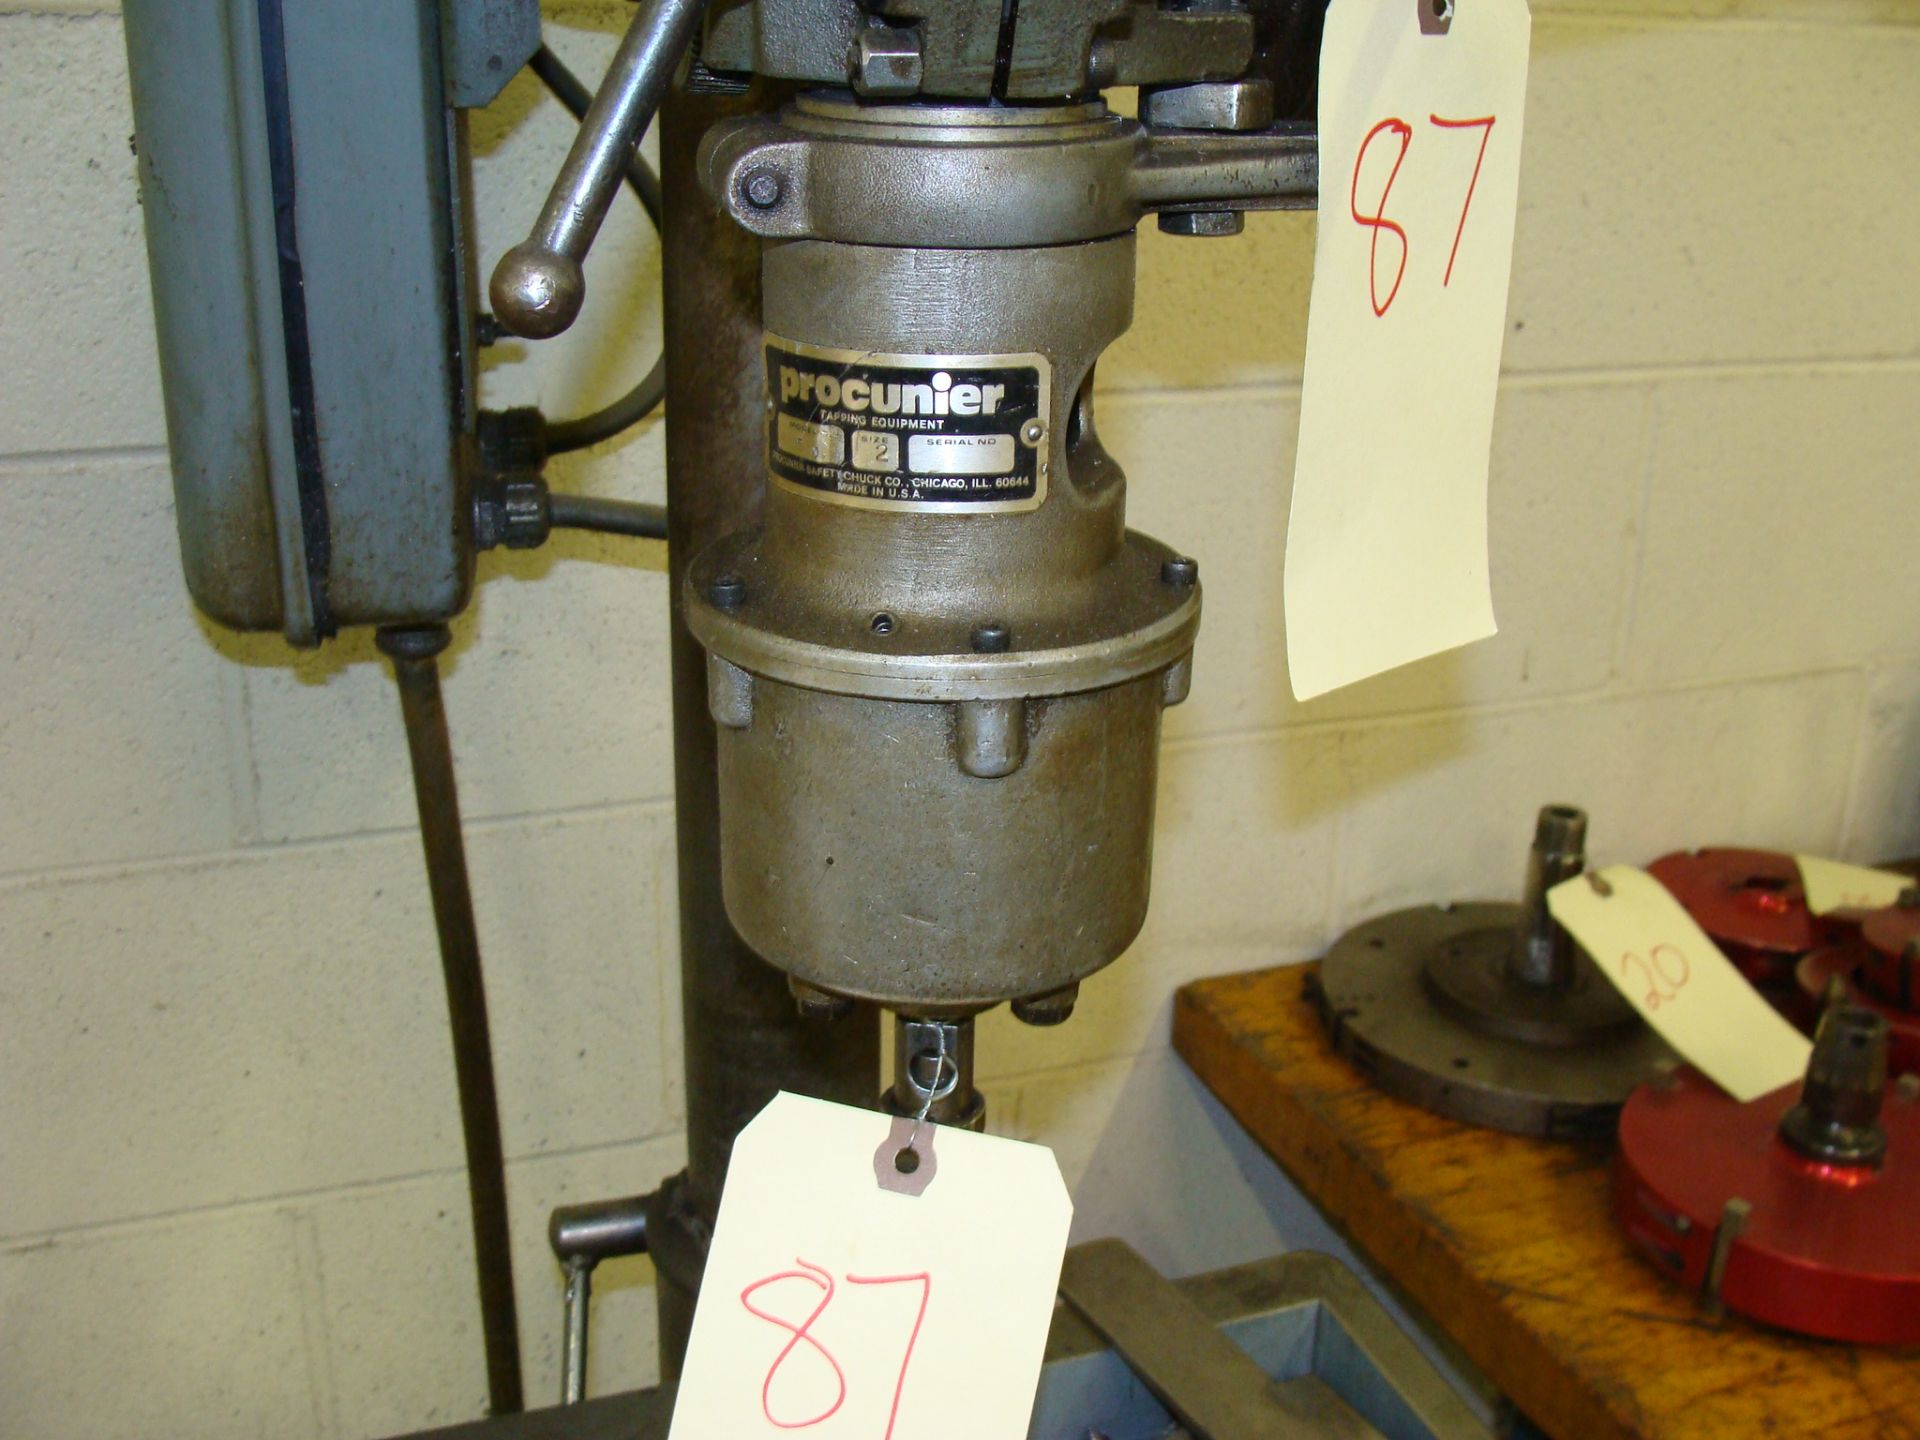 Rockwell Model 15665 Drill Press Serial # 1767870 with Procunier Taping Head - Image 2 of 2